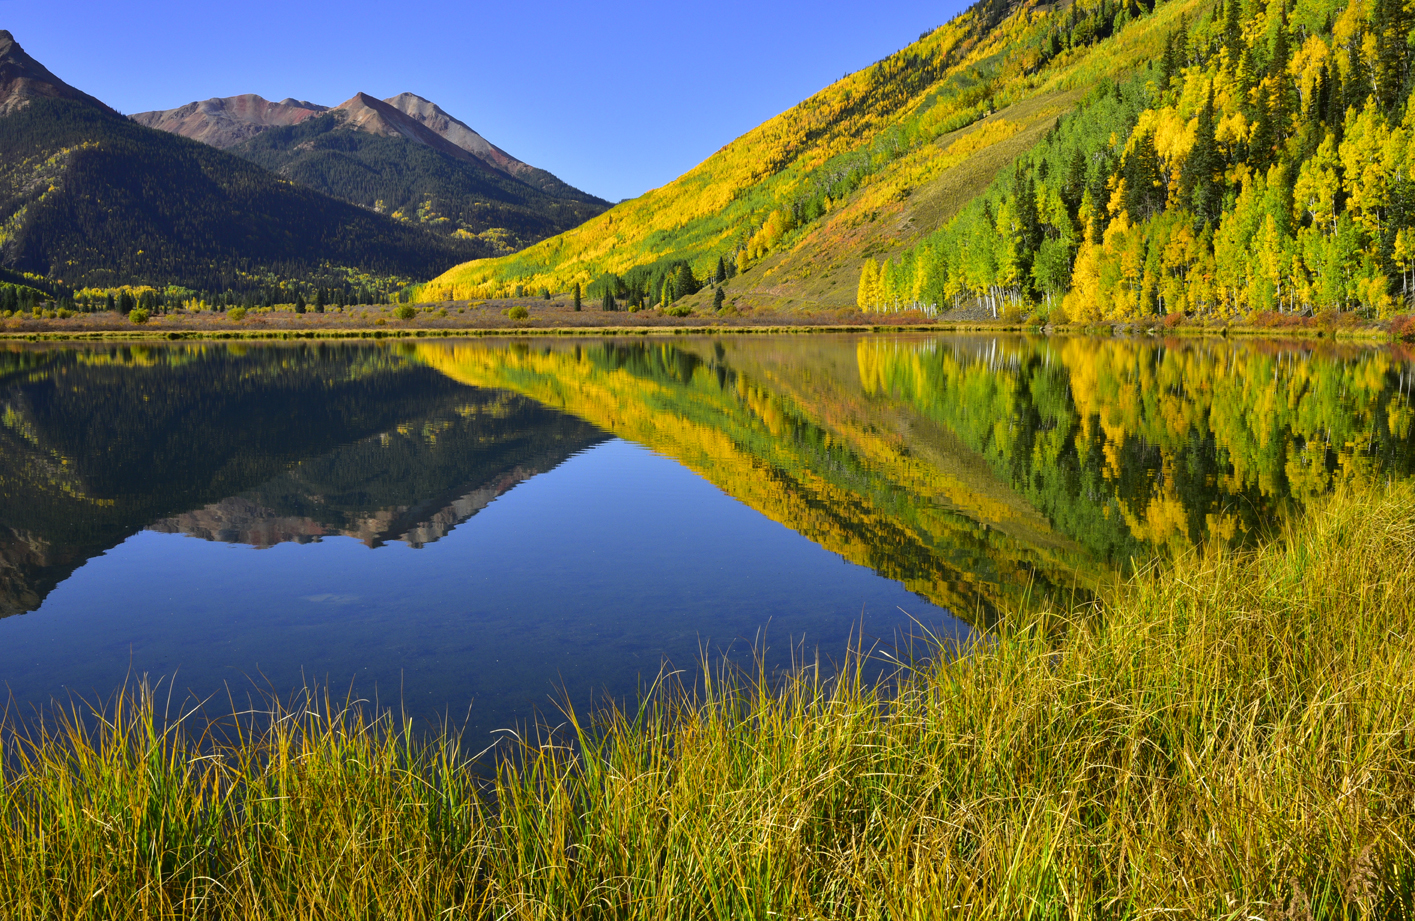 Red Mountains (left), fall colors on Hayden Mountain (center, right), reflection in Crystal Lake  -  Uncompahgre National Forest, Colorado